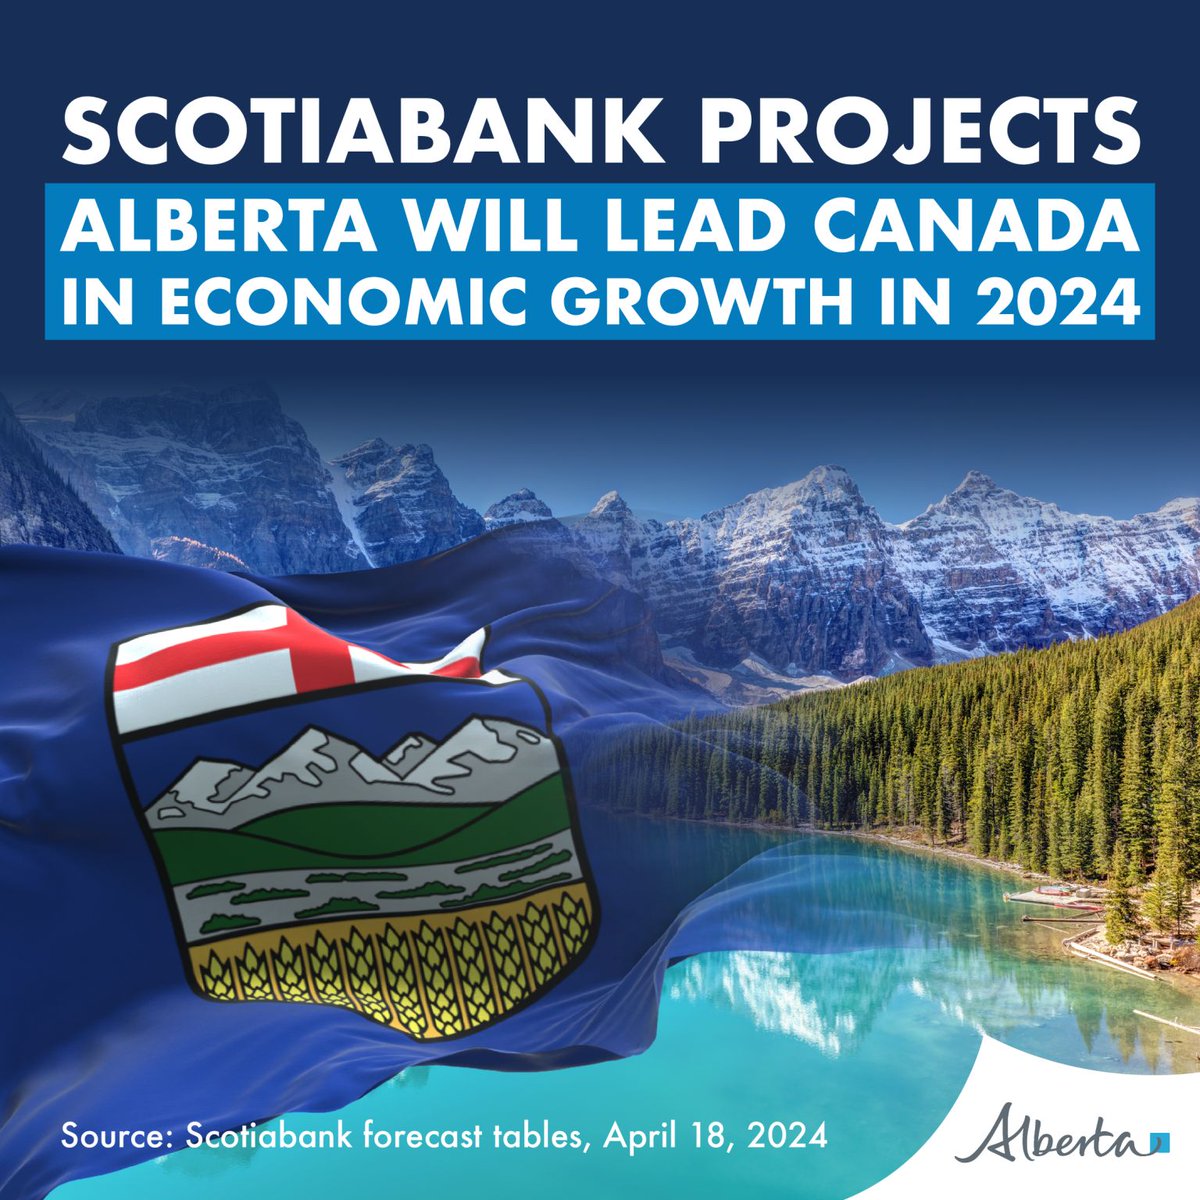 With Alberta's Budget 2024 (not to be confused with the federal budget released last week), we are continuing to set the foundation for growth, investment attraction and job creation. Scotiabank's recent projections show that Alberta will lead Canada in economic growth this…